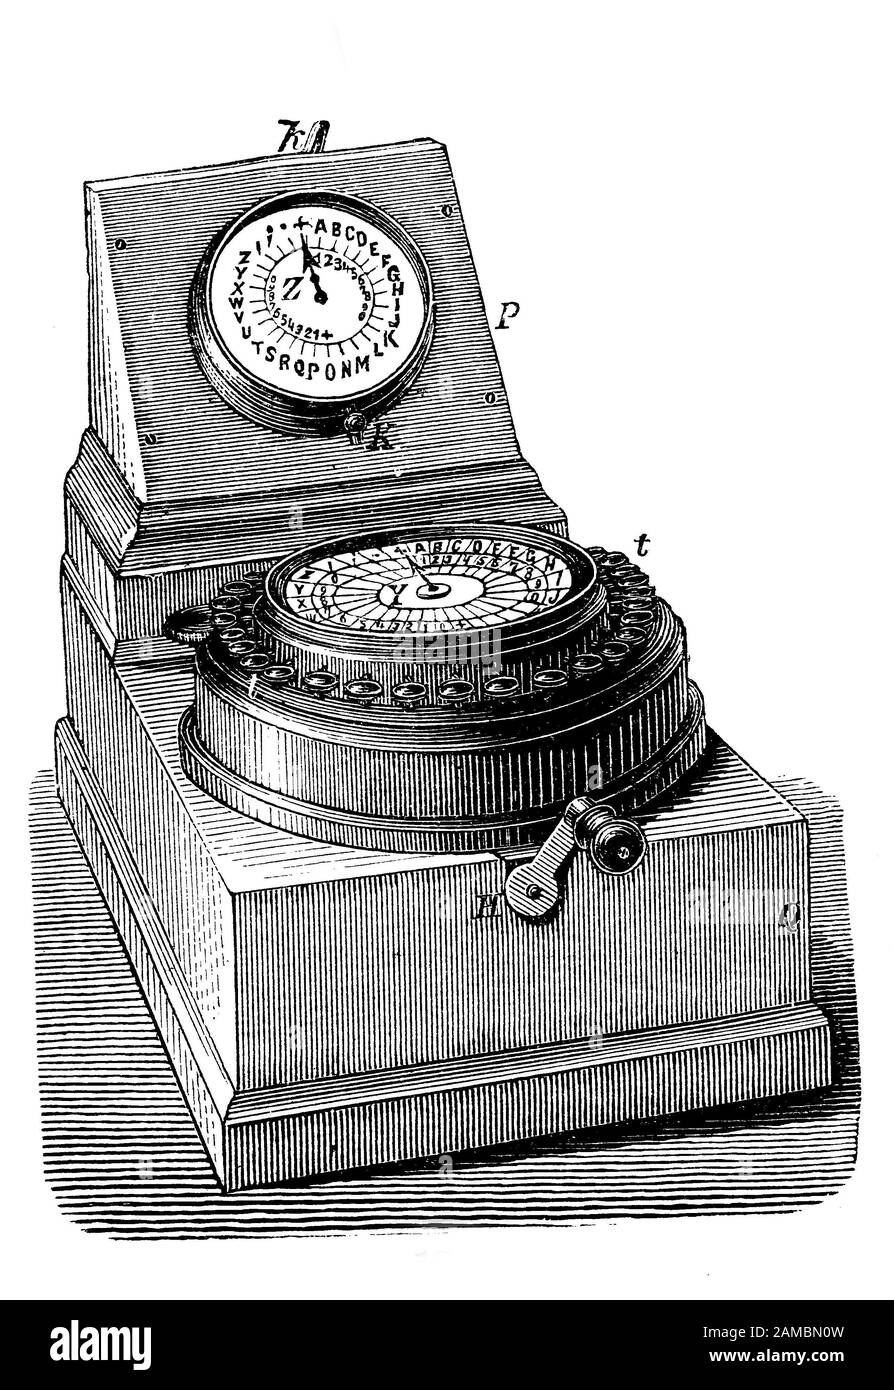 a needle telegraph produced by Charles Wheatstone  /  ein Zeigertelegraf von Charles Wheatstone, Historisch, digital improved reproduction of an original from the 19th century / digitale Reproduktion einer Originalvorlage aus dem 19. Jahrhundert, Stock Photo